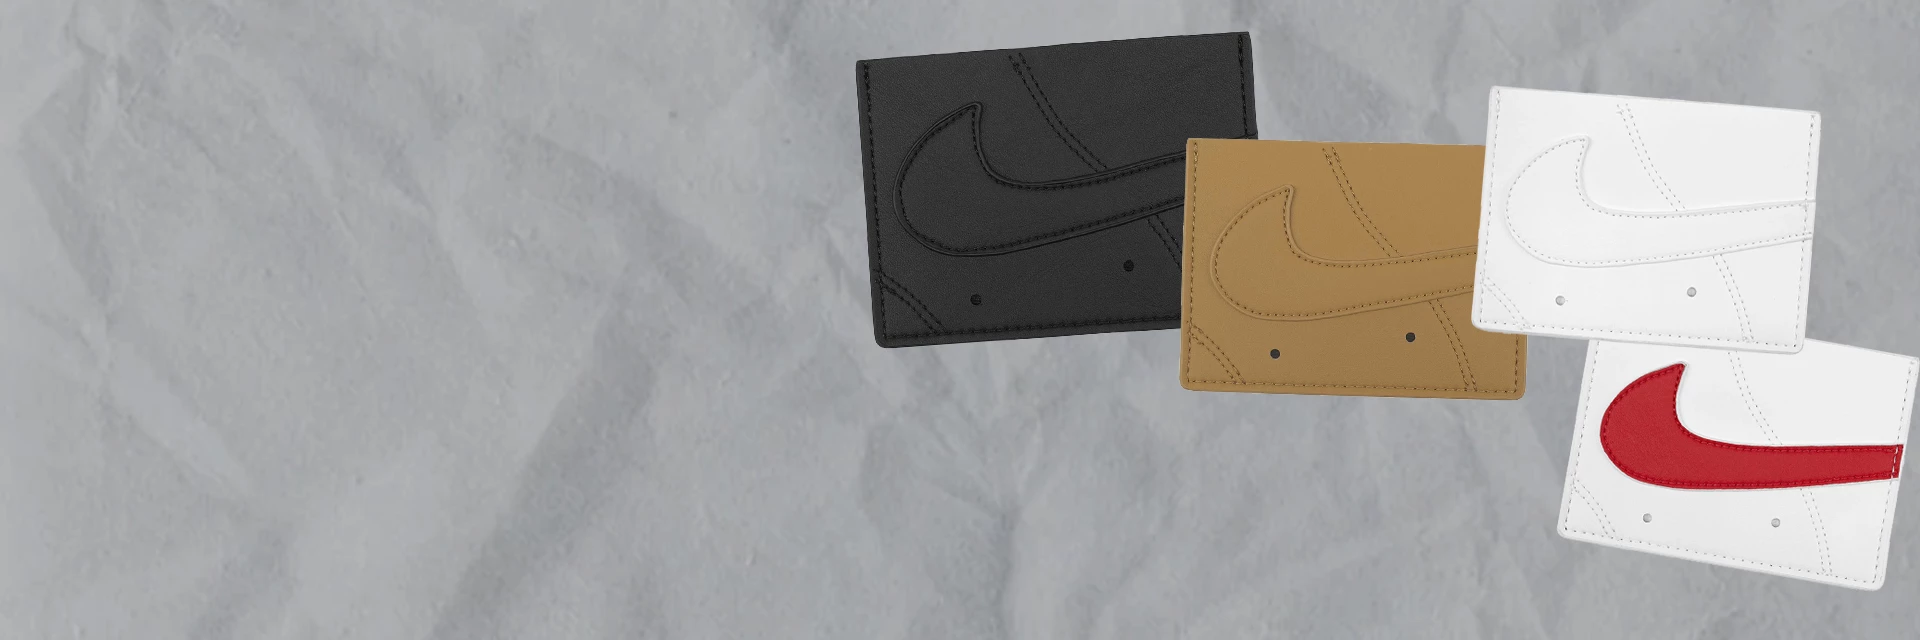 Nike Card Wallet with 20% discount